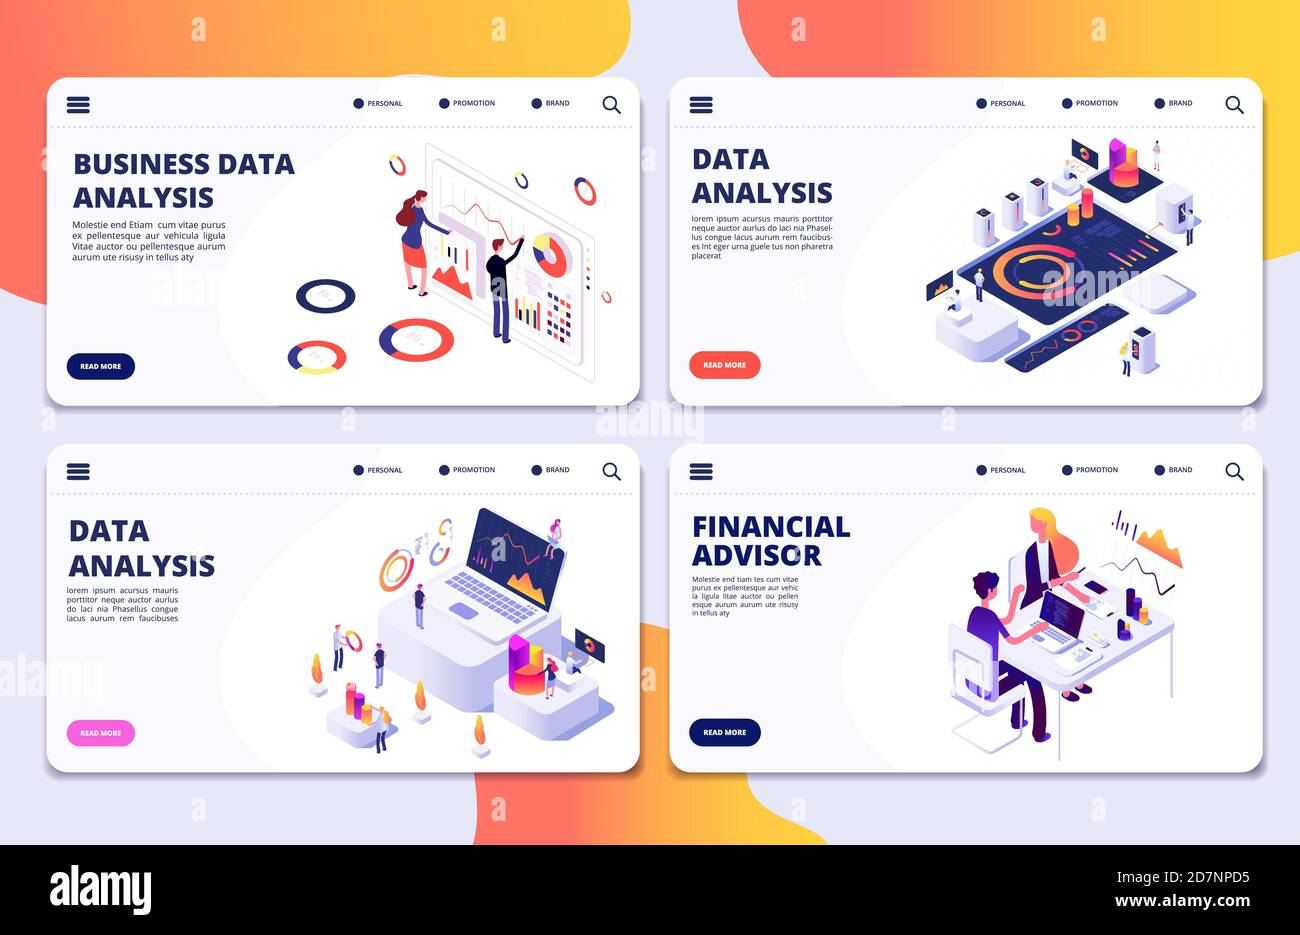 Data analysis, financial adviser, business data analysis vector landing pages template. Illustration of business financial management, analysis data Stock Vector